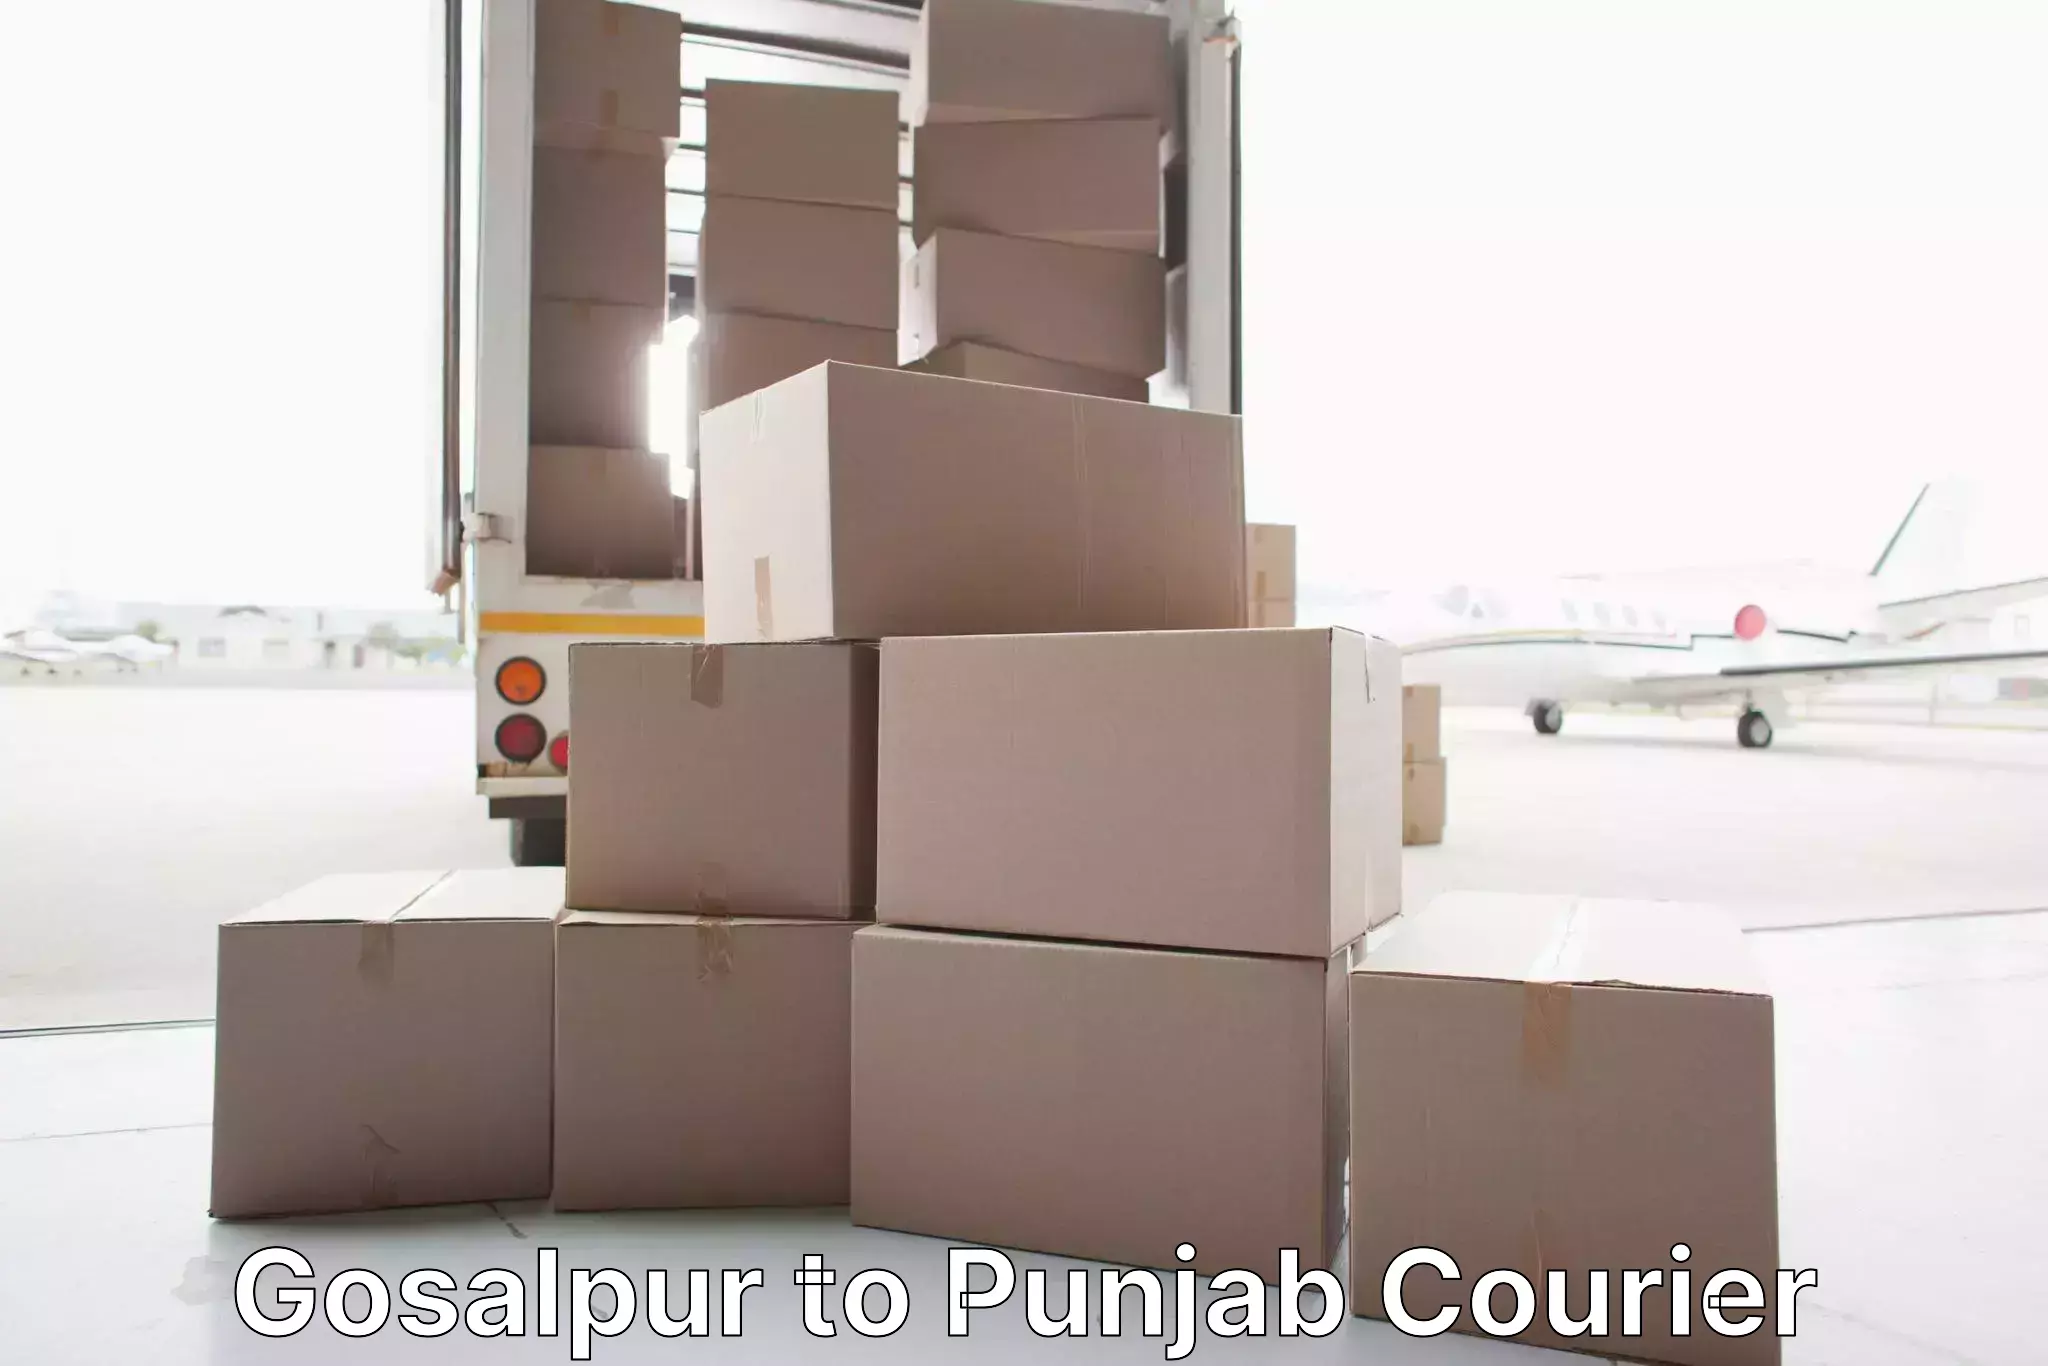 High-quality moving services Gosalpur to Khanna